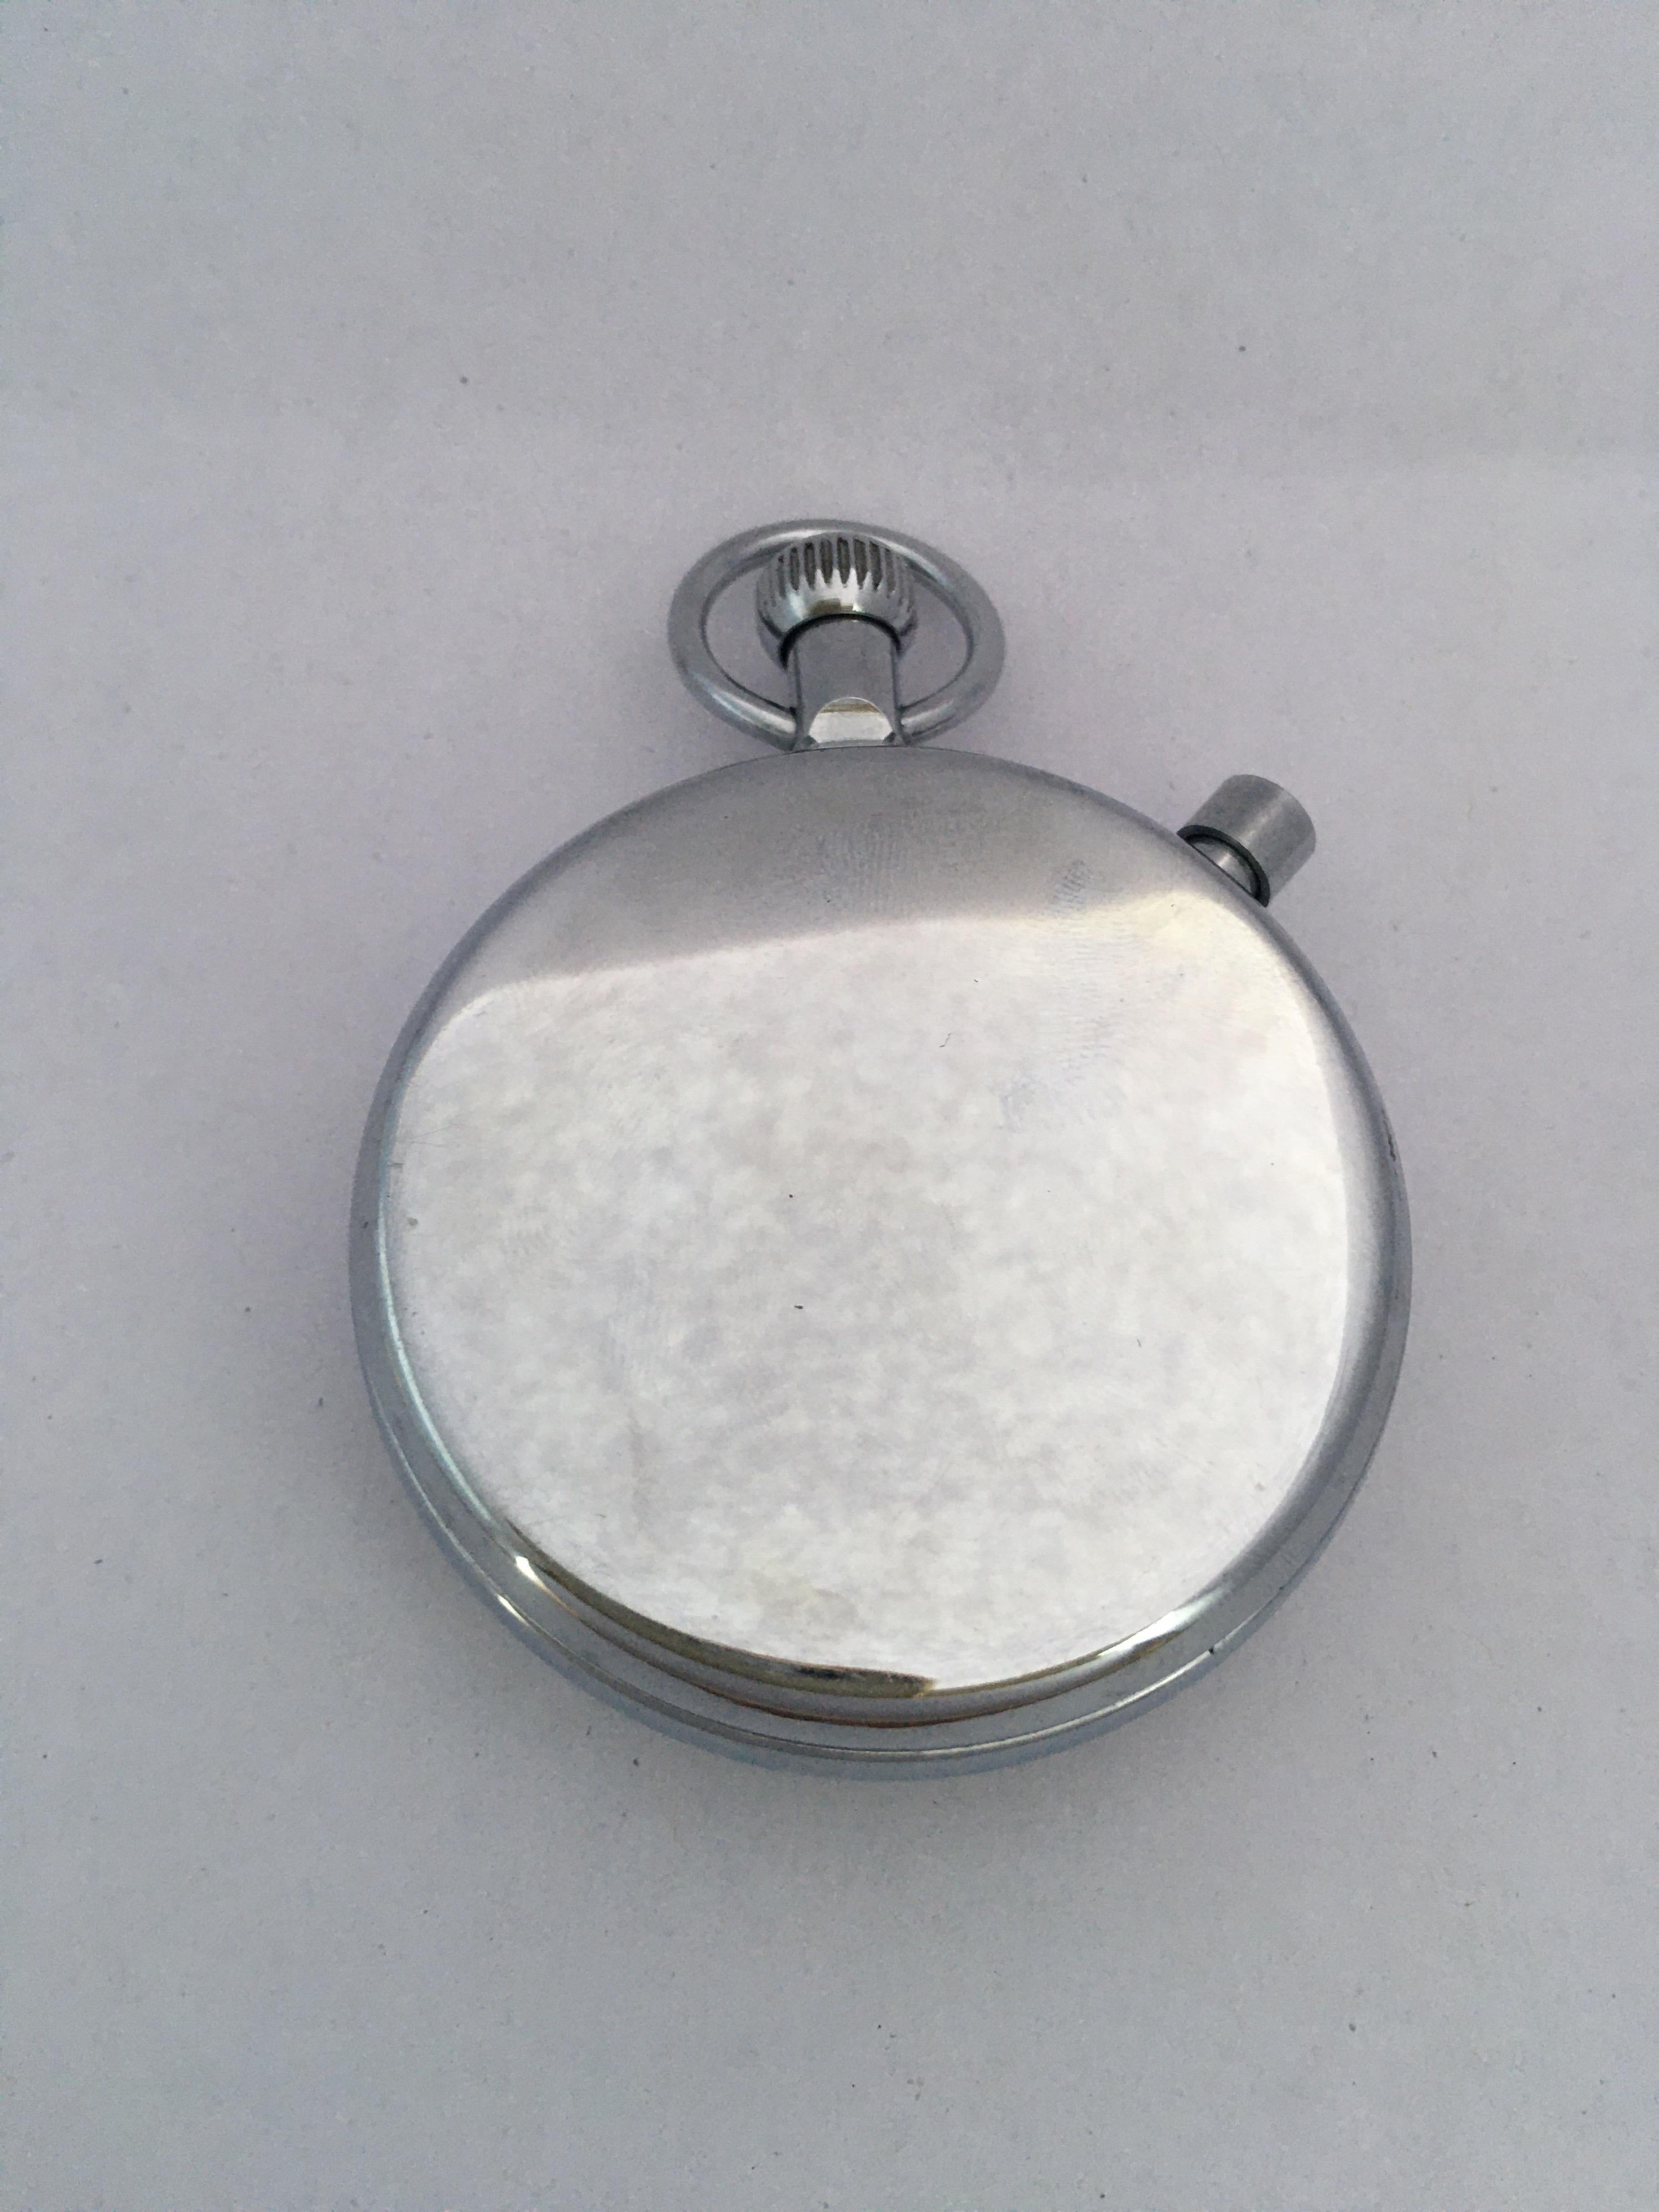 This beautiful vintage hand winding stopwatch is in good working condition and it is running well. Visible signs of ageing and wear with minor cracks on the edge of the glass as shown. tiny and light scratches on the glass and on the watch case.